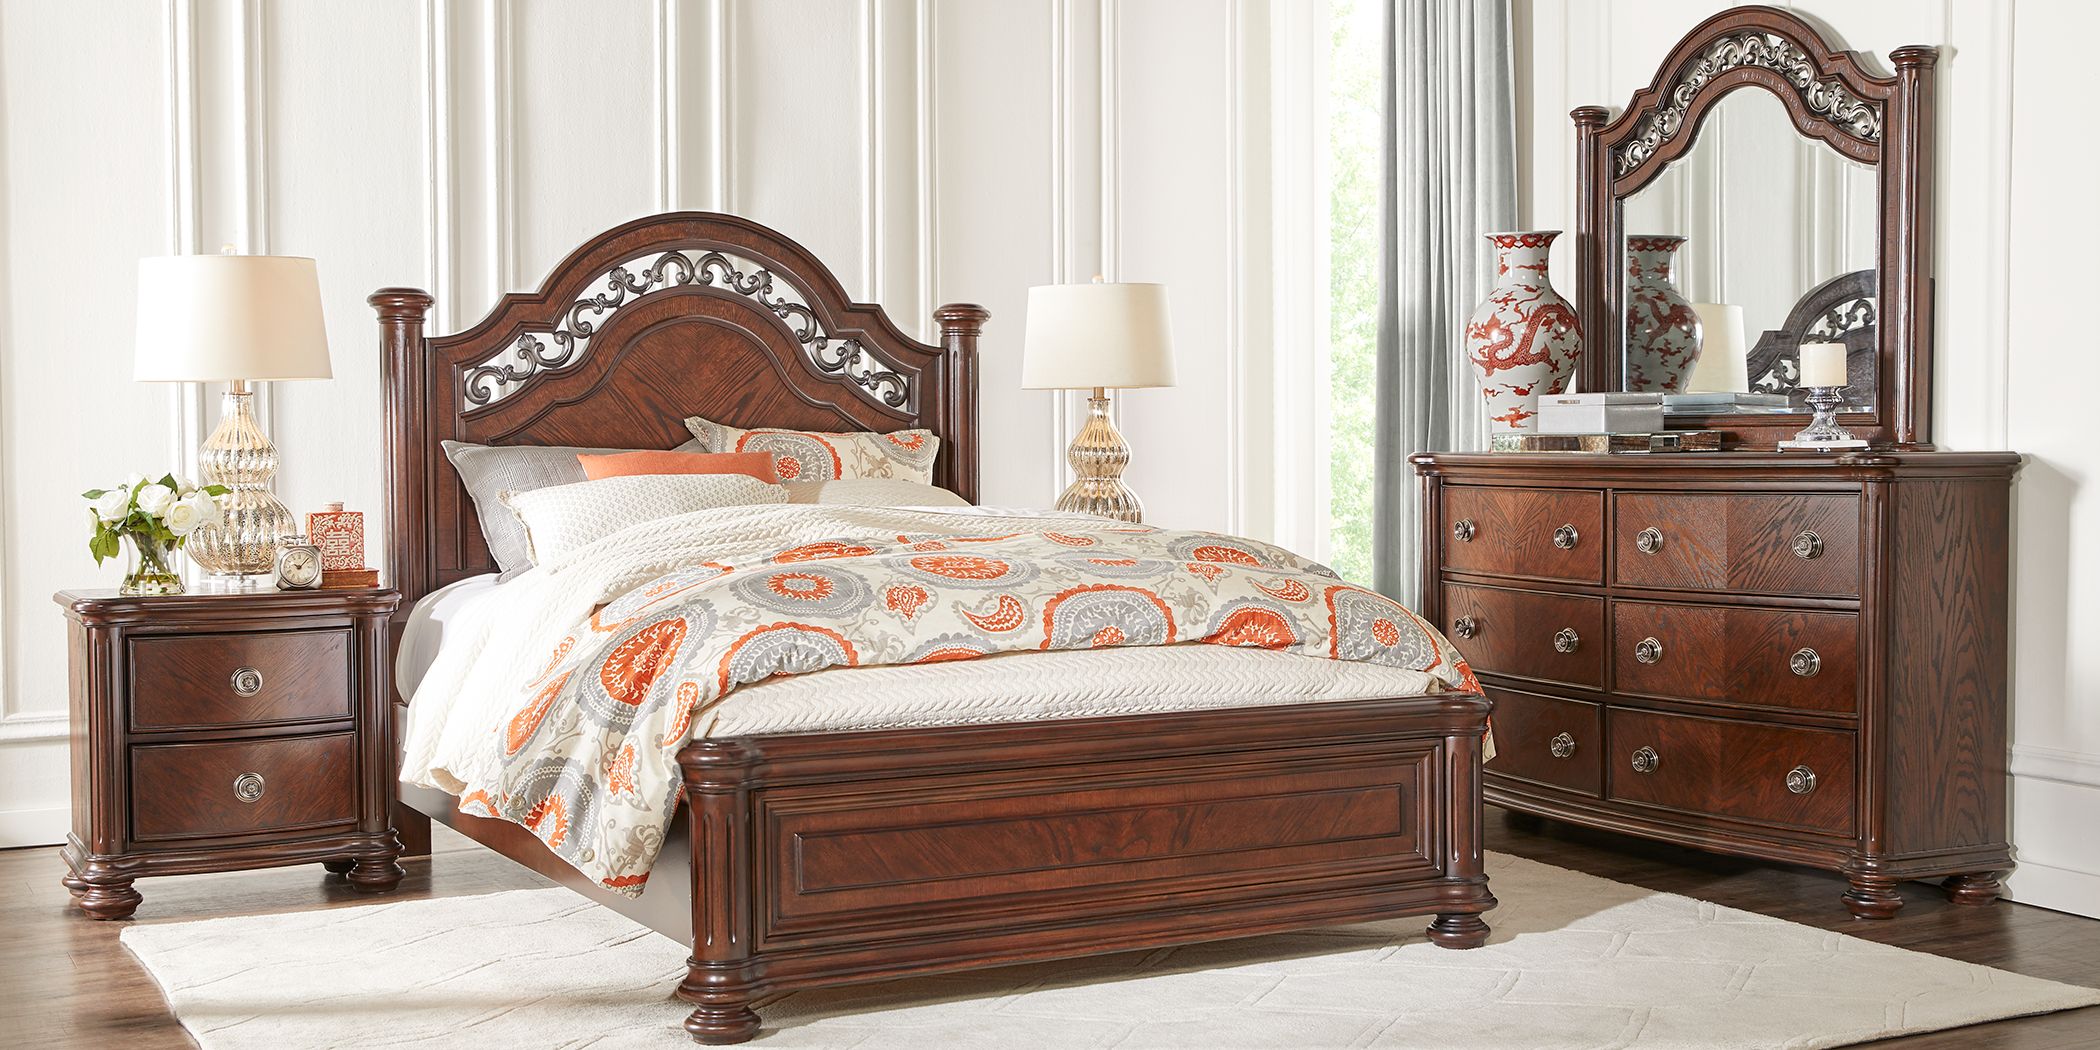 Discount Bedroom Furniture Rooms To Go Outlet,Small Entryway Storage Bench